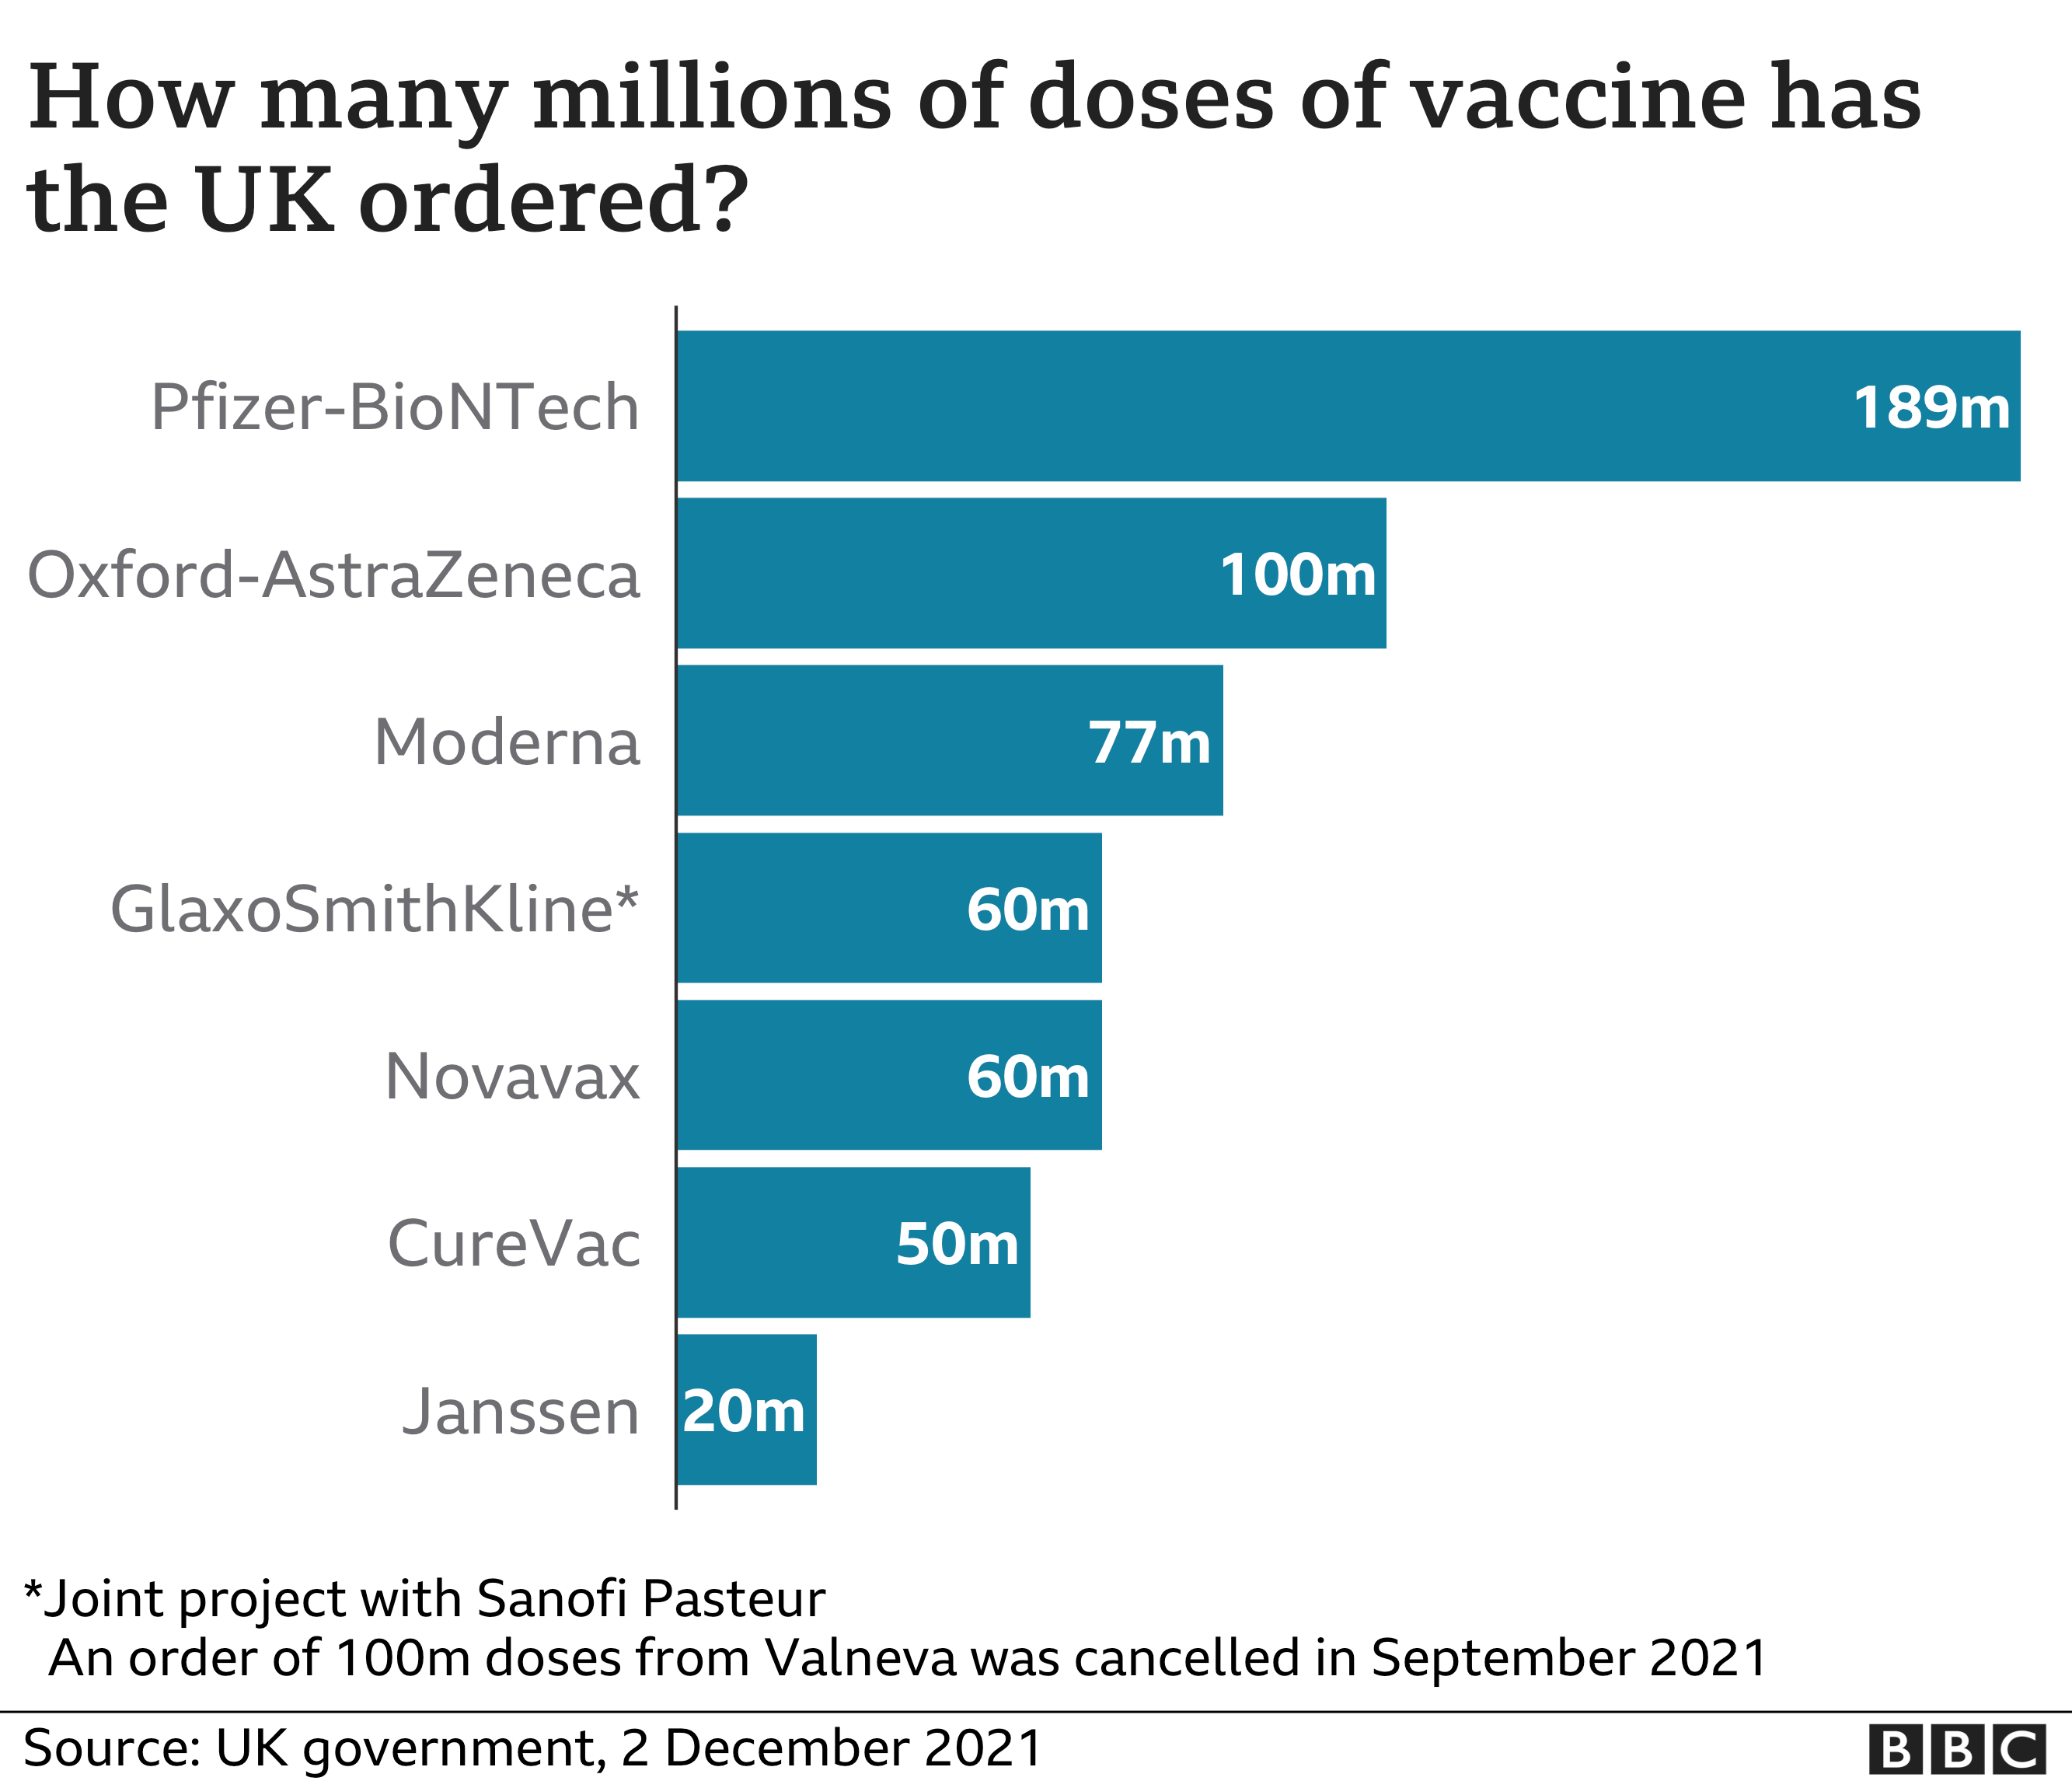 Chart shows vaccine doses ordered by UK government